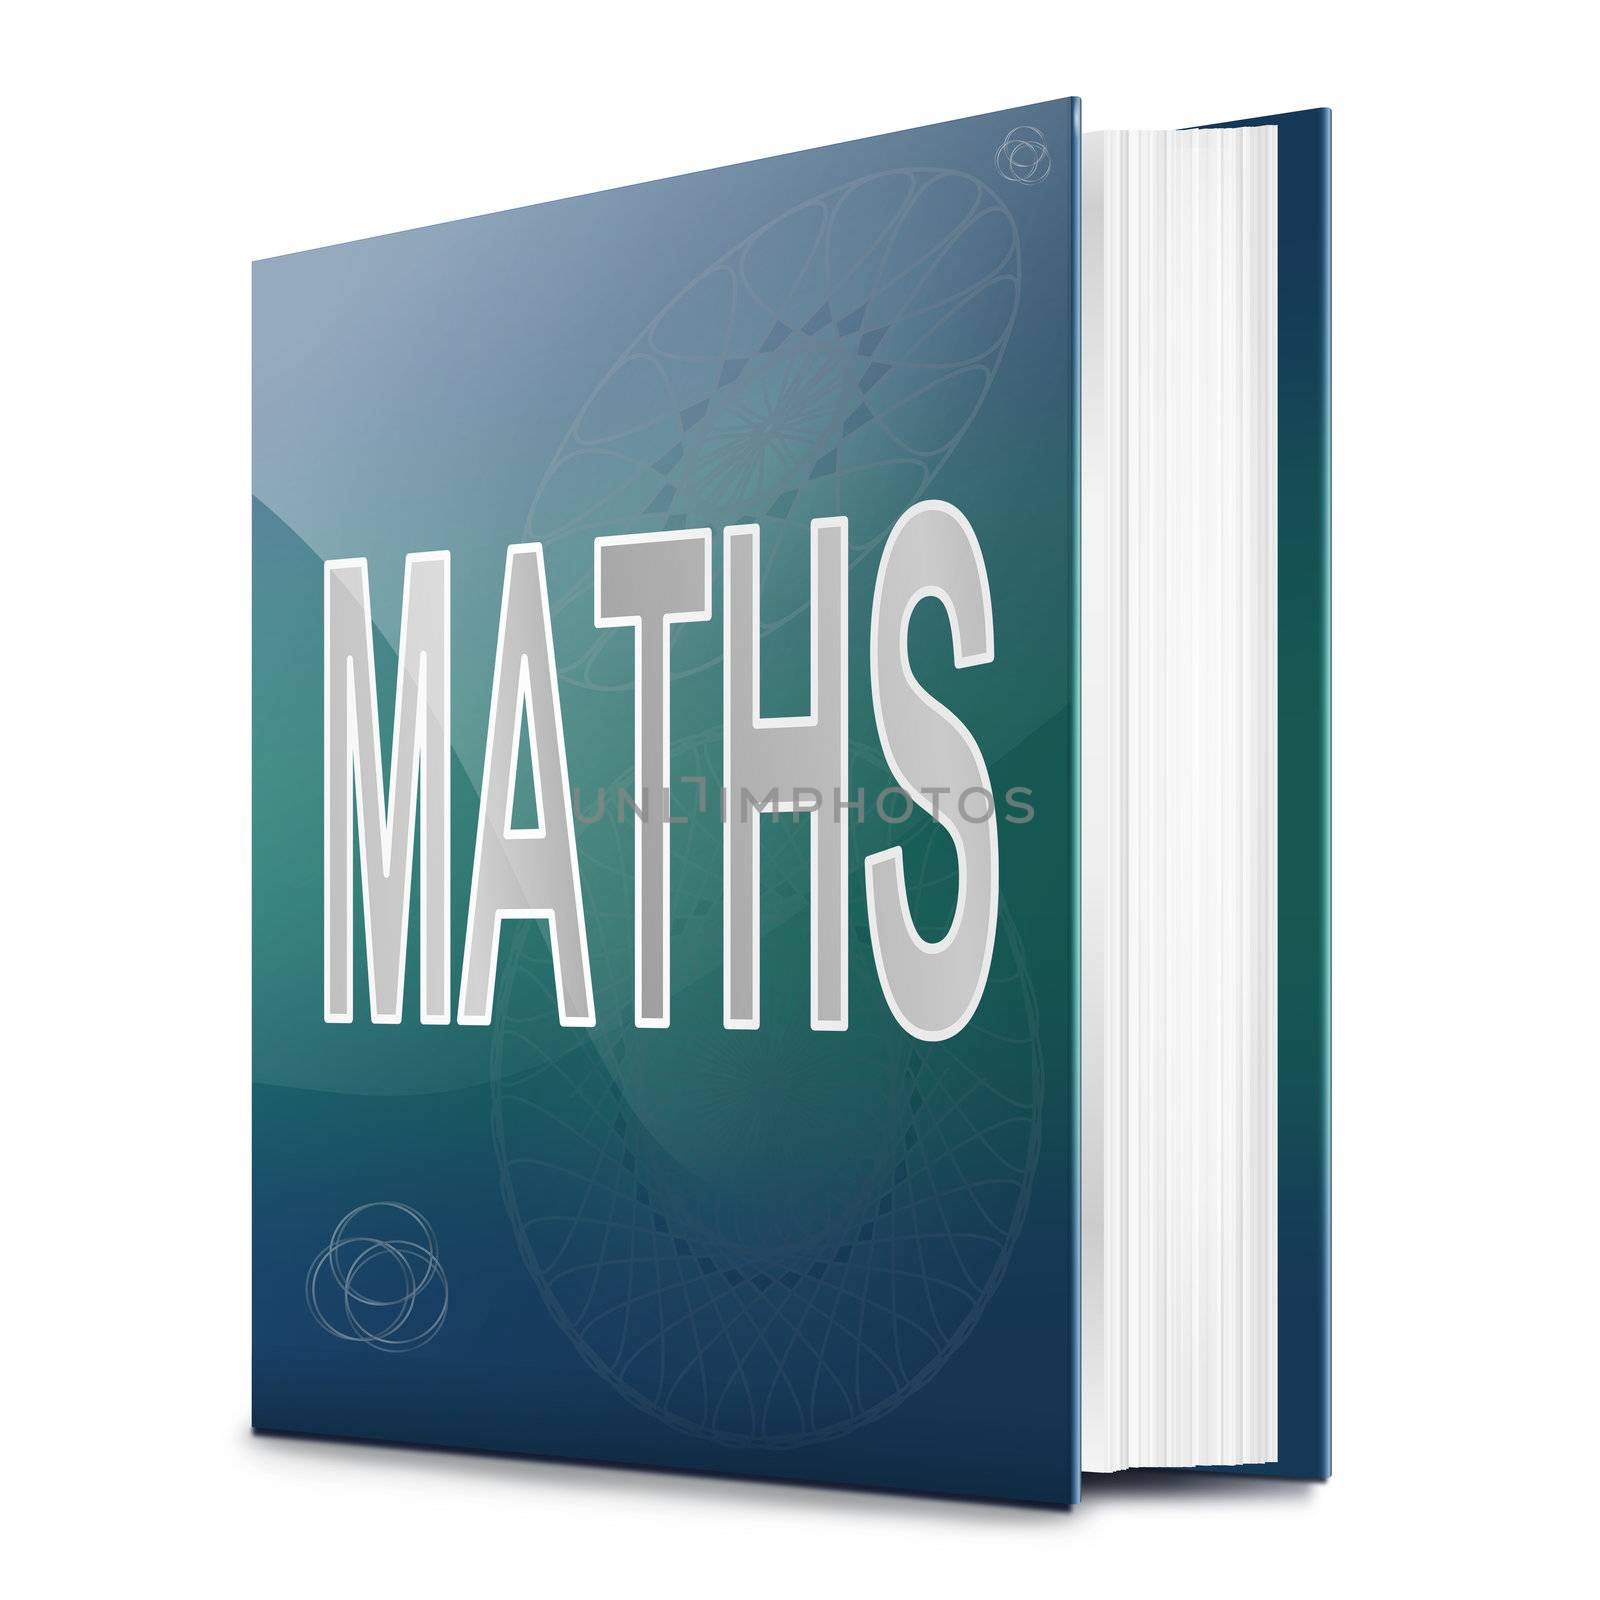 Illustration depicting a book with a maths concept title. White background.